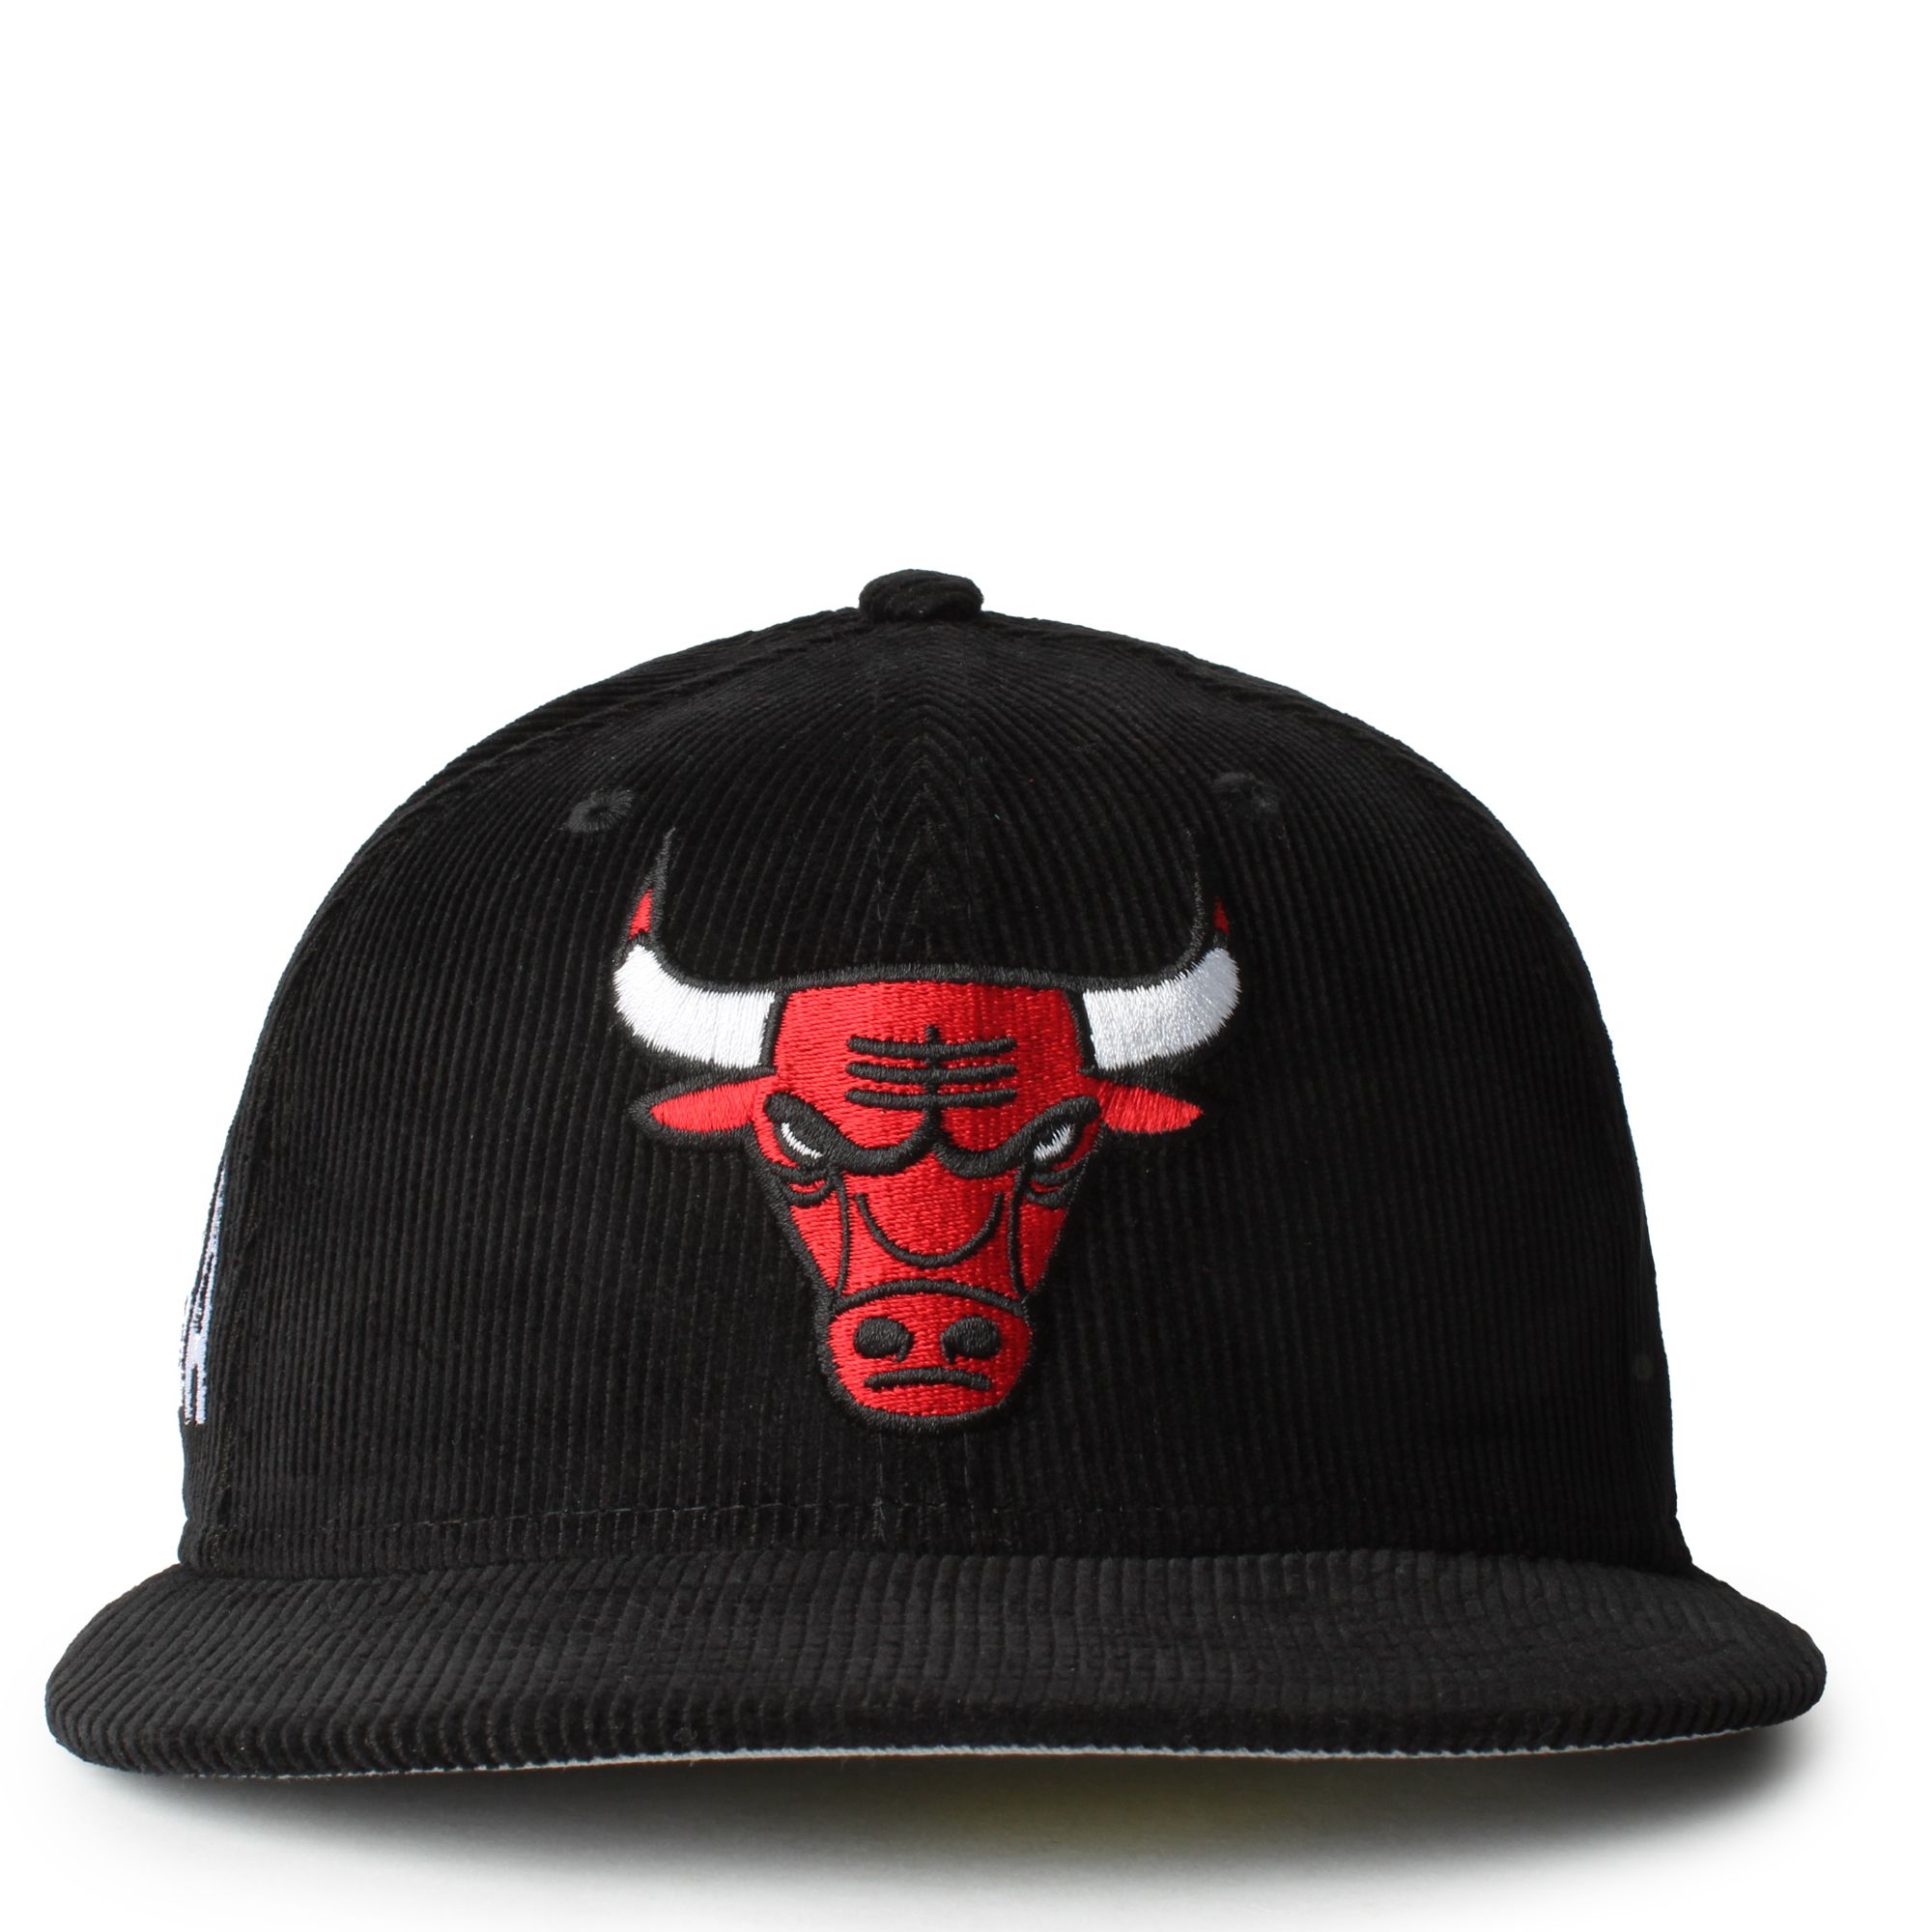 Official Chicago Bulls Ladies Hats, Snapbacks, Fitted Hats, Beanies